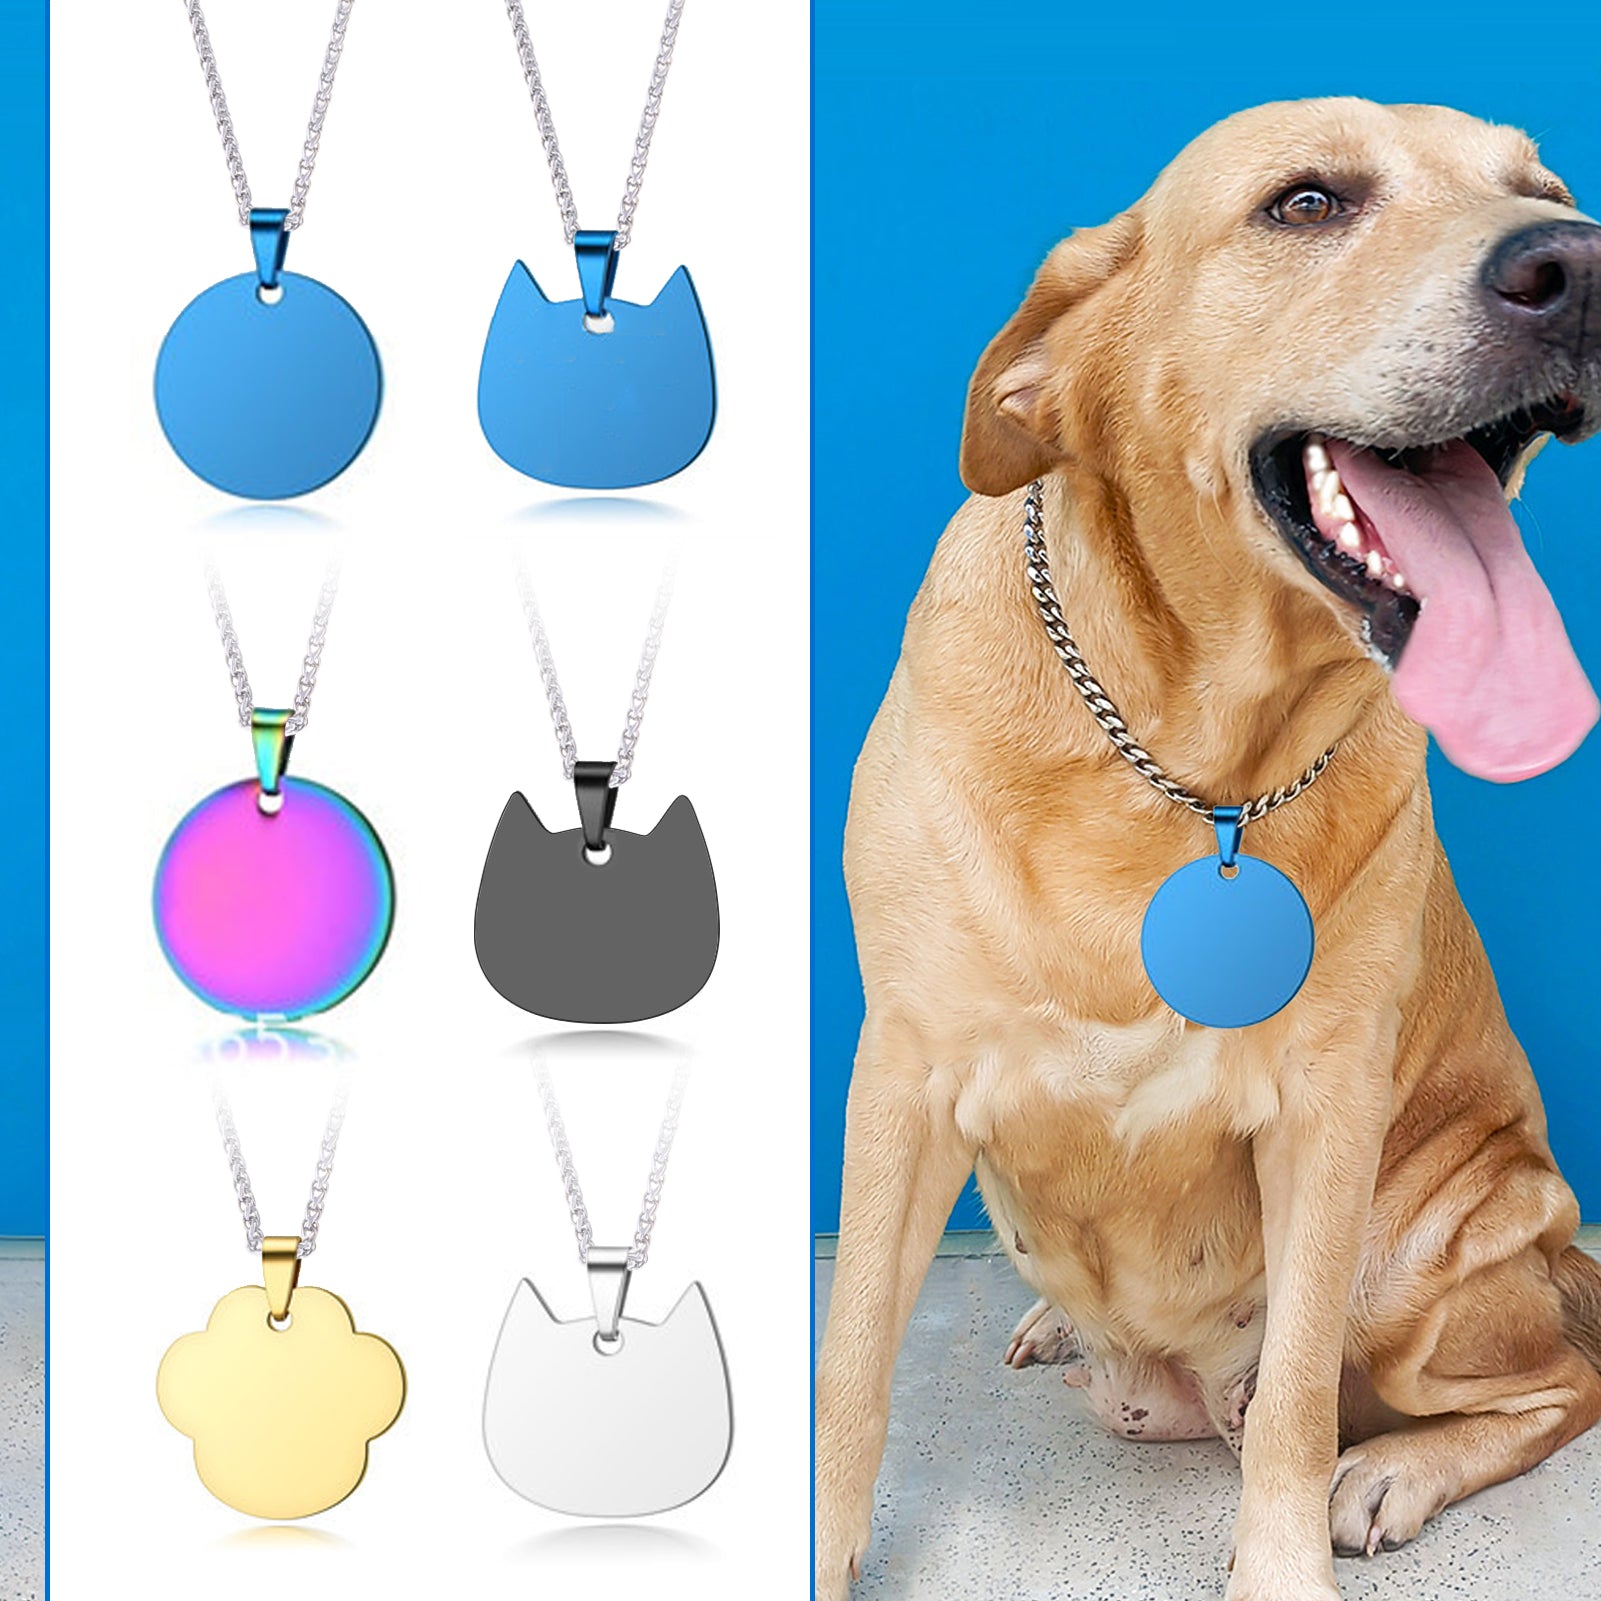 A yellow Labrador with its tongue out sits next to a display of various colorful pet ID tags, including round, cat head, and bone shapes, crafted with precise laser engraving on metallic chains. The background is a solid blue color. Featured prominently are the 20pcs Titanium Steel Blank Stamping Tags Pets Tag Metal Pendant Charms for Falcon Laser Engraving by CrealityFalcon.